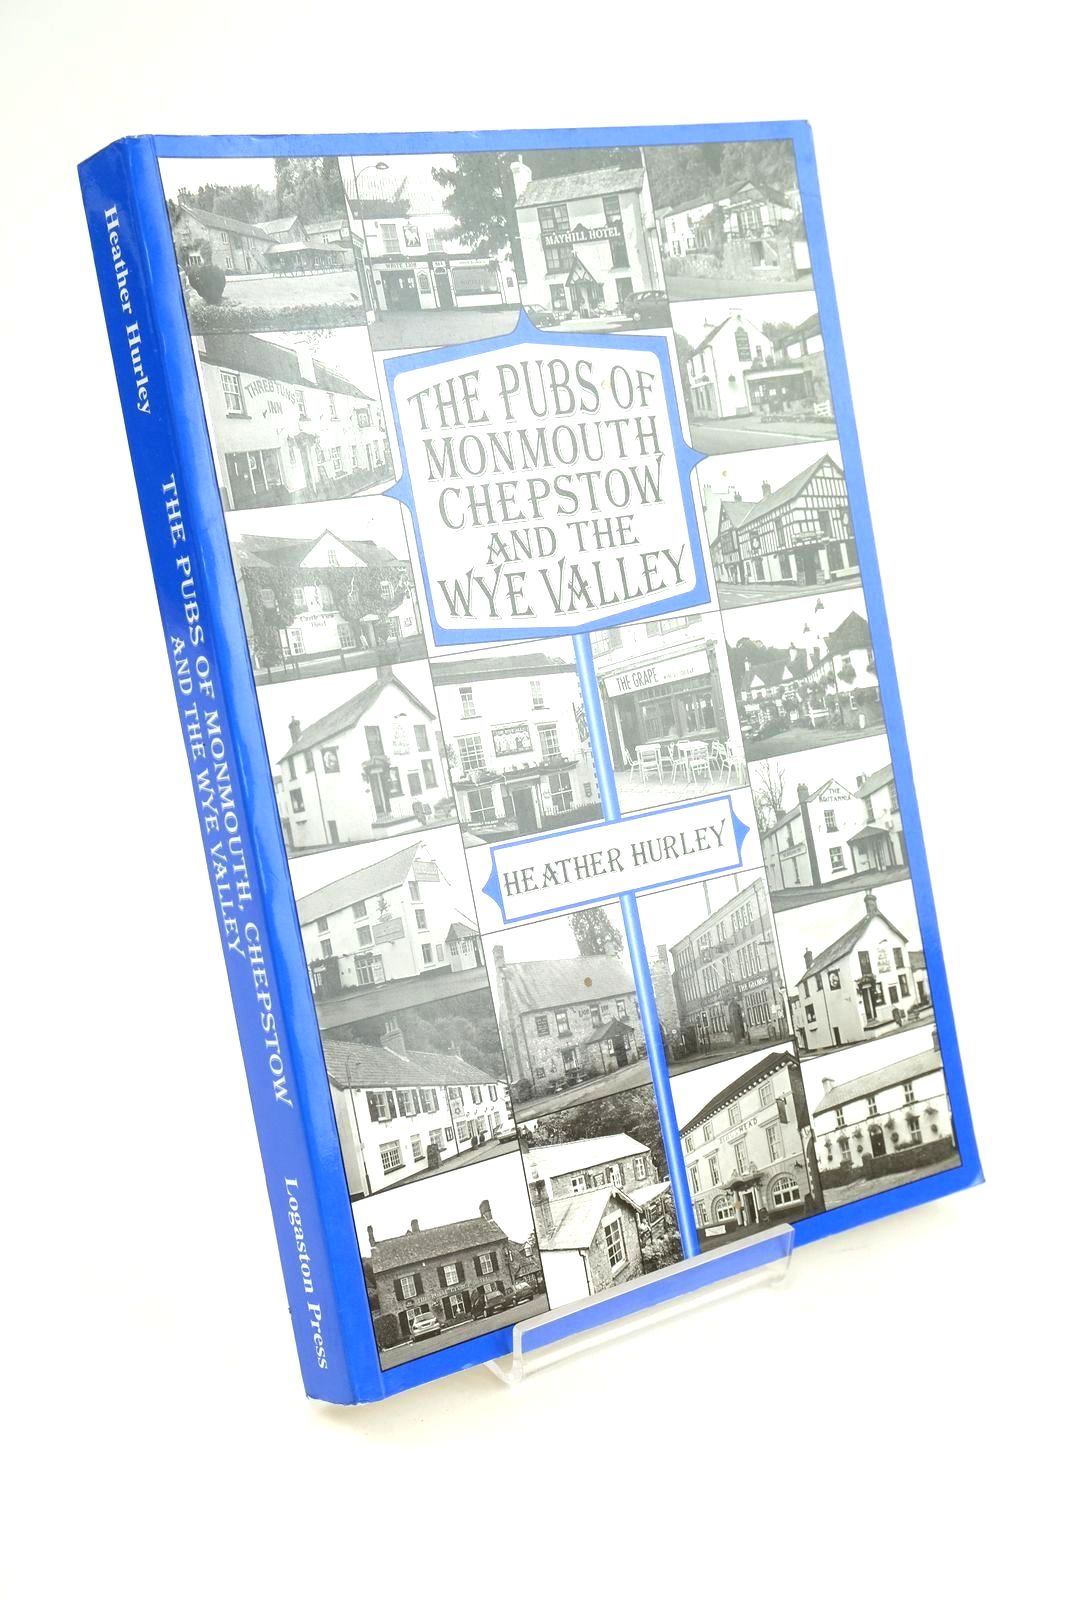 Photo of THE PUBS OF MONMOUTH, CHEPSTOW AND THE WYE VALLEY written by Hurley, Heather published by Logaston Press (STOCK CODE: 1323761)  for sale by Stella & Rose's Books